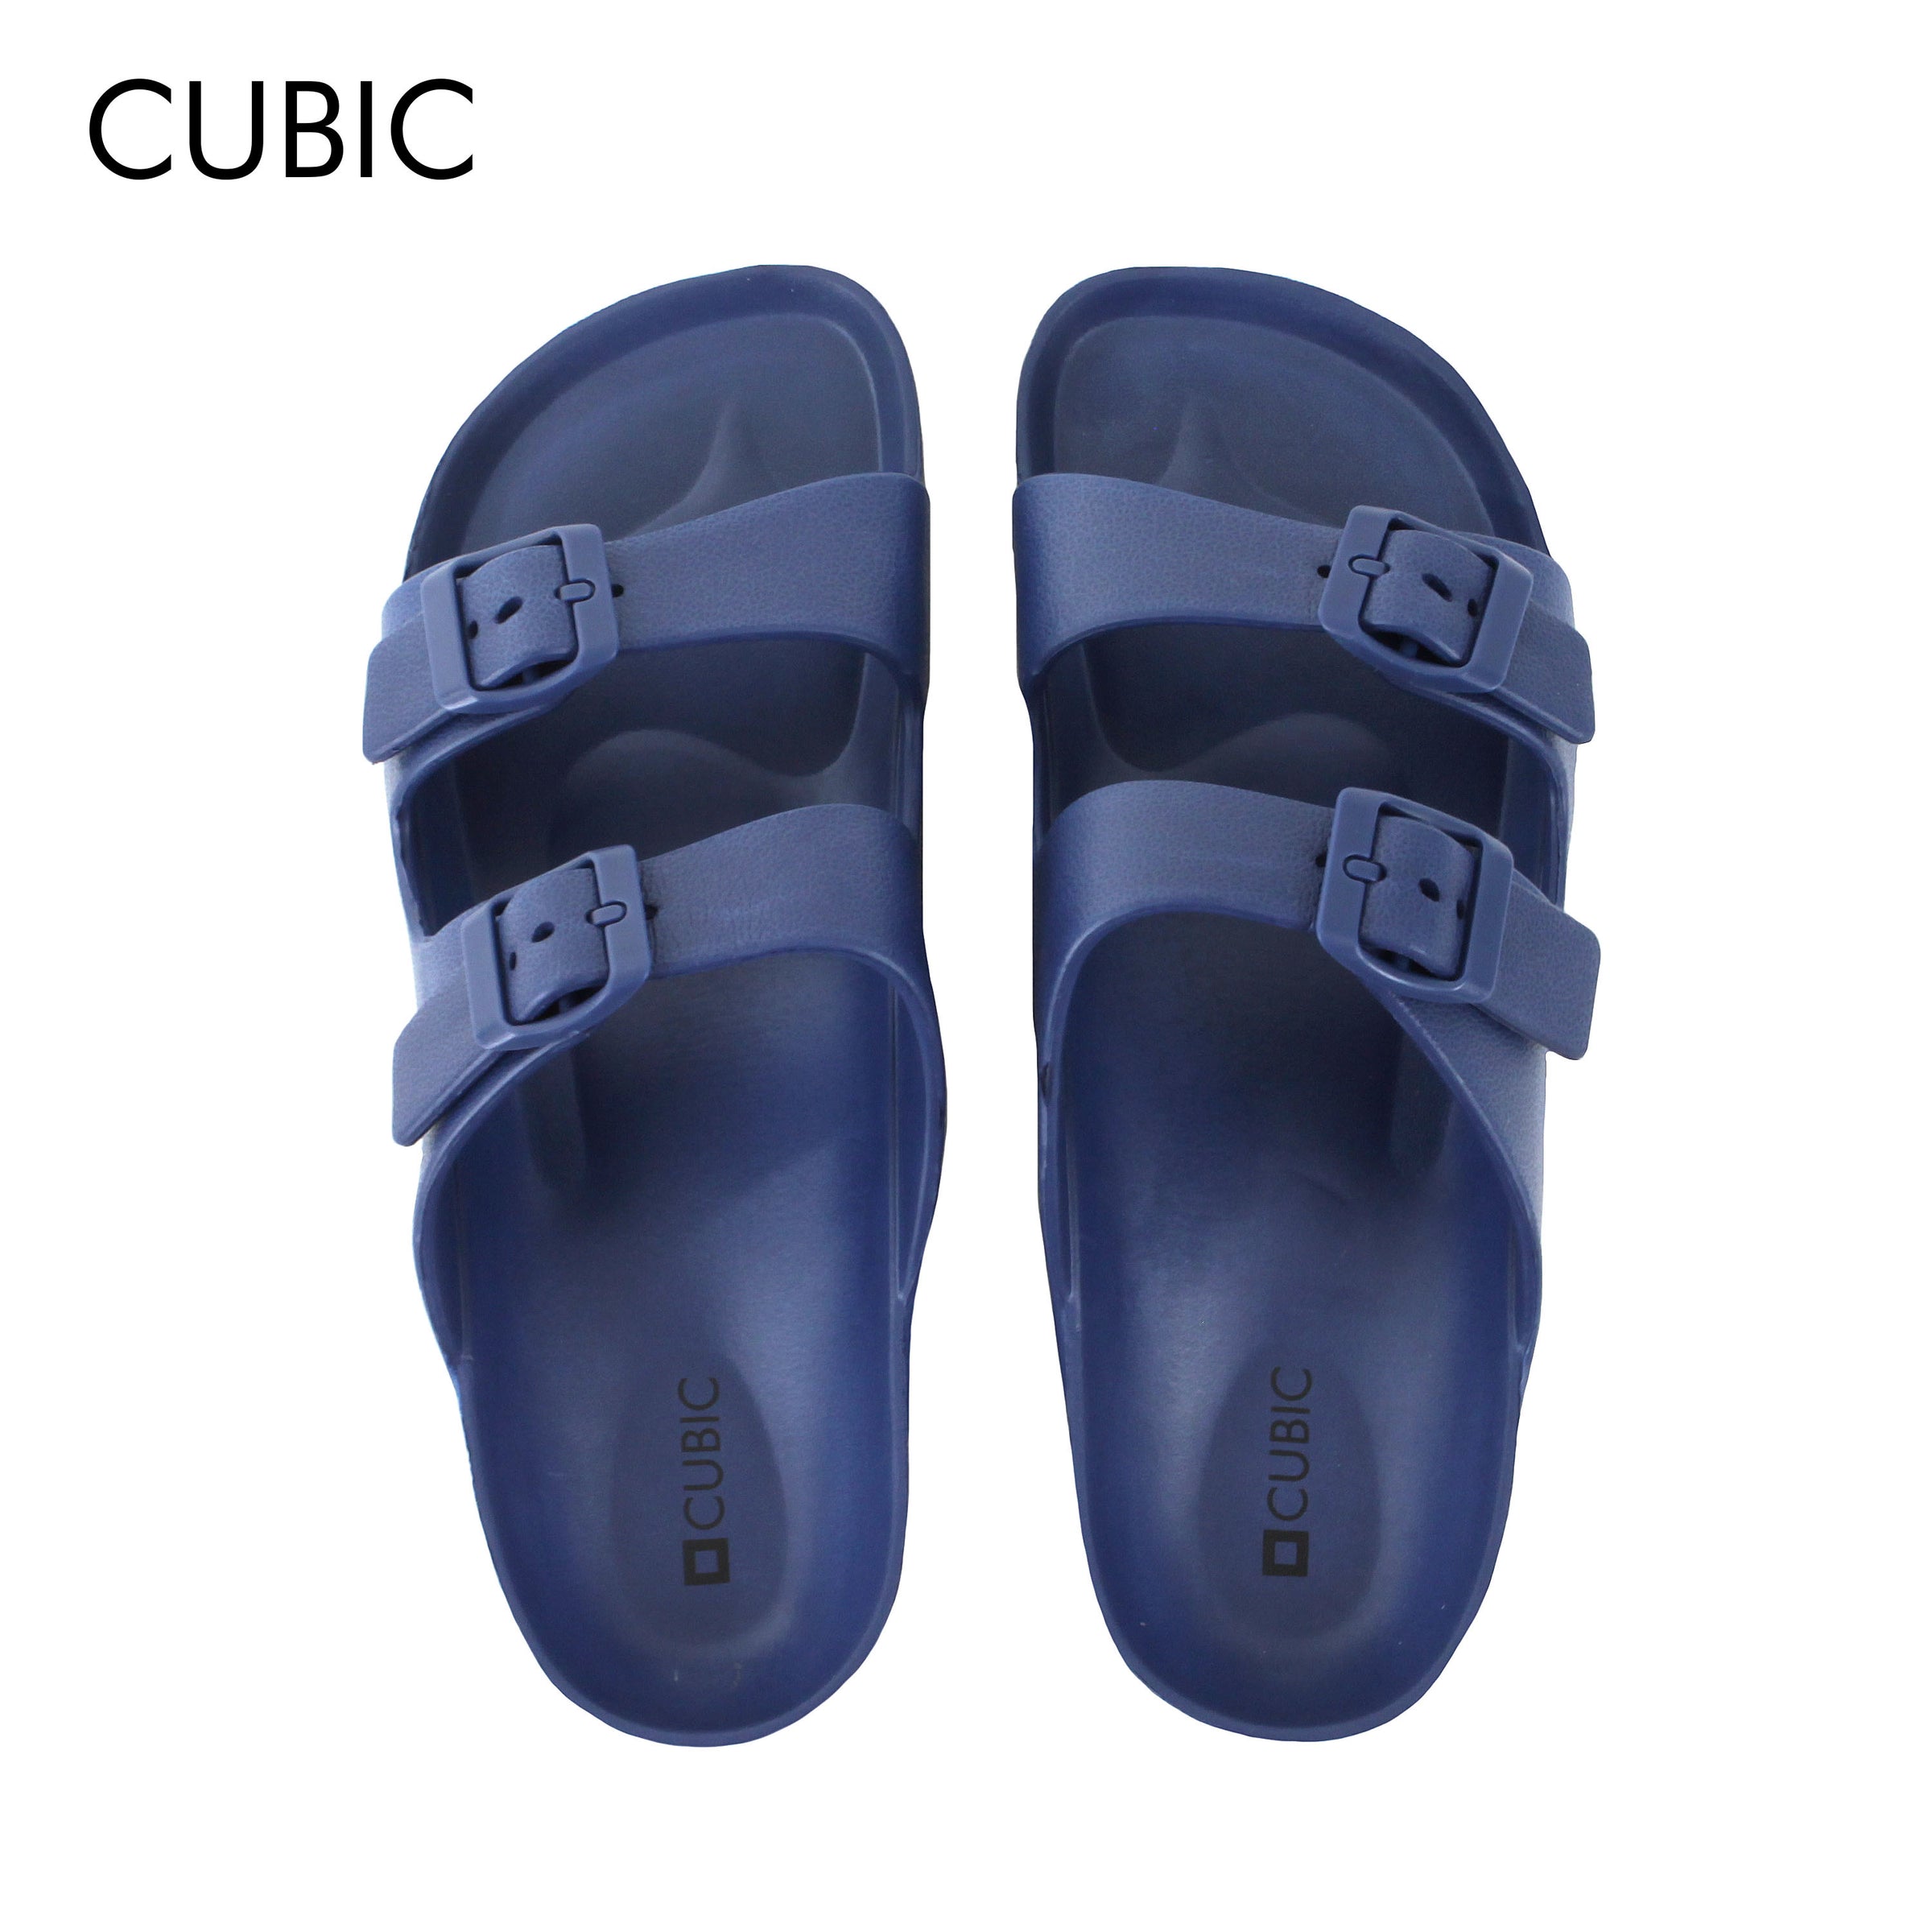 Cubic Men Double Buckle Slip On Dual Strap Slides Sandals Slippers for – CUBIC  Online Store